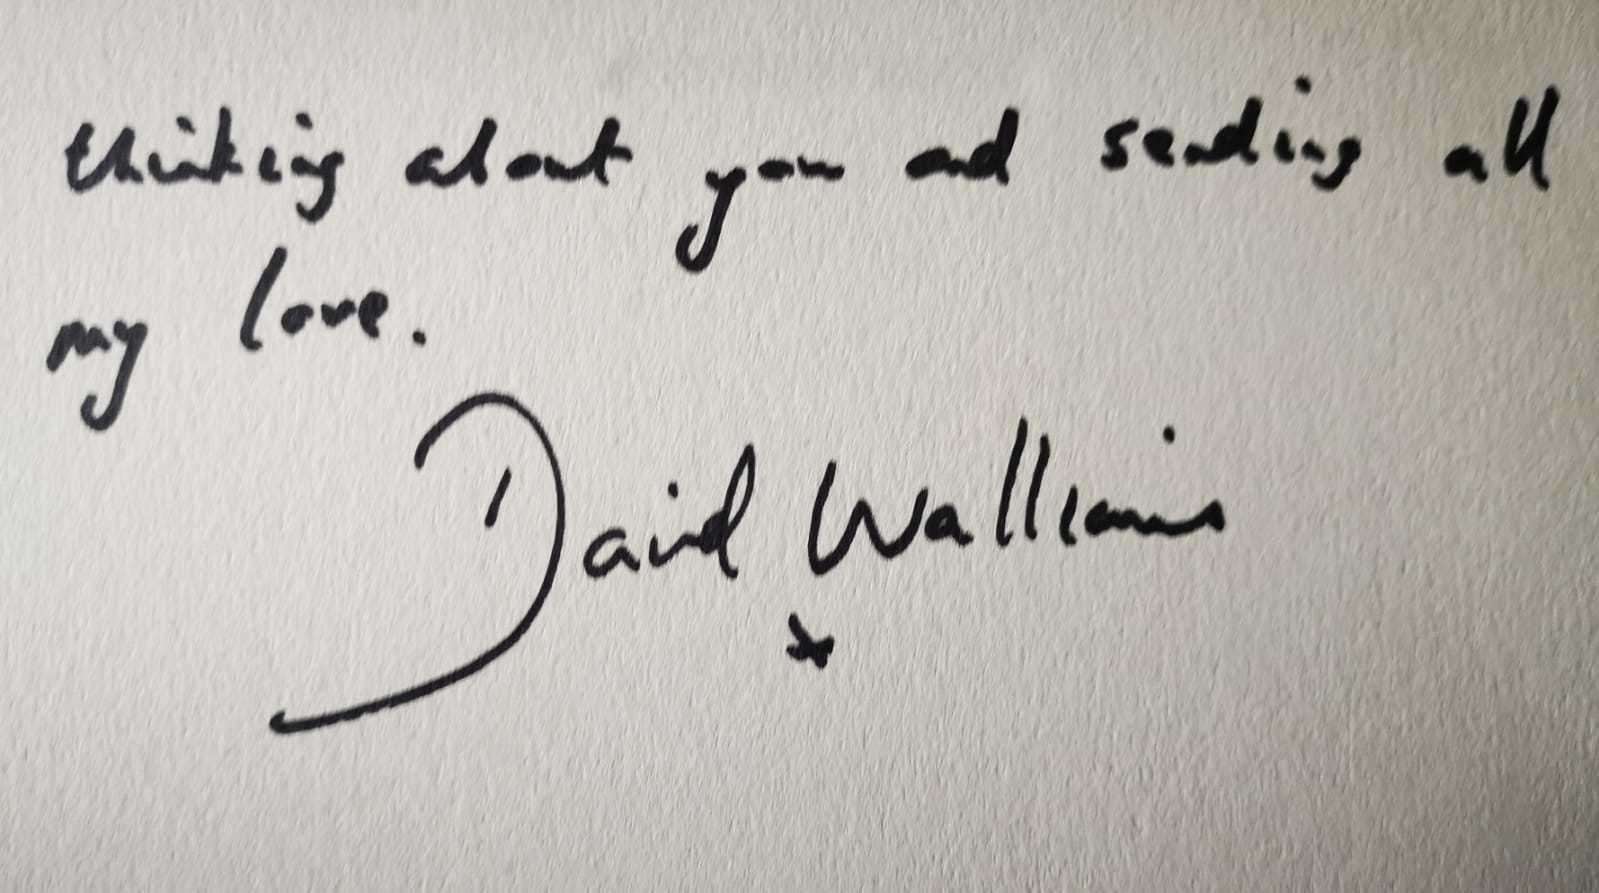 David Walliams sent a note to say he was thinking of Charlotte and send his love